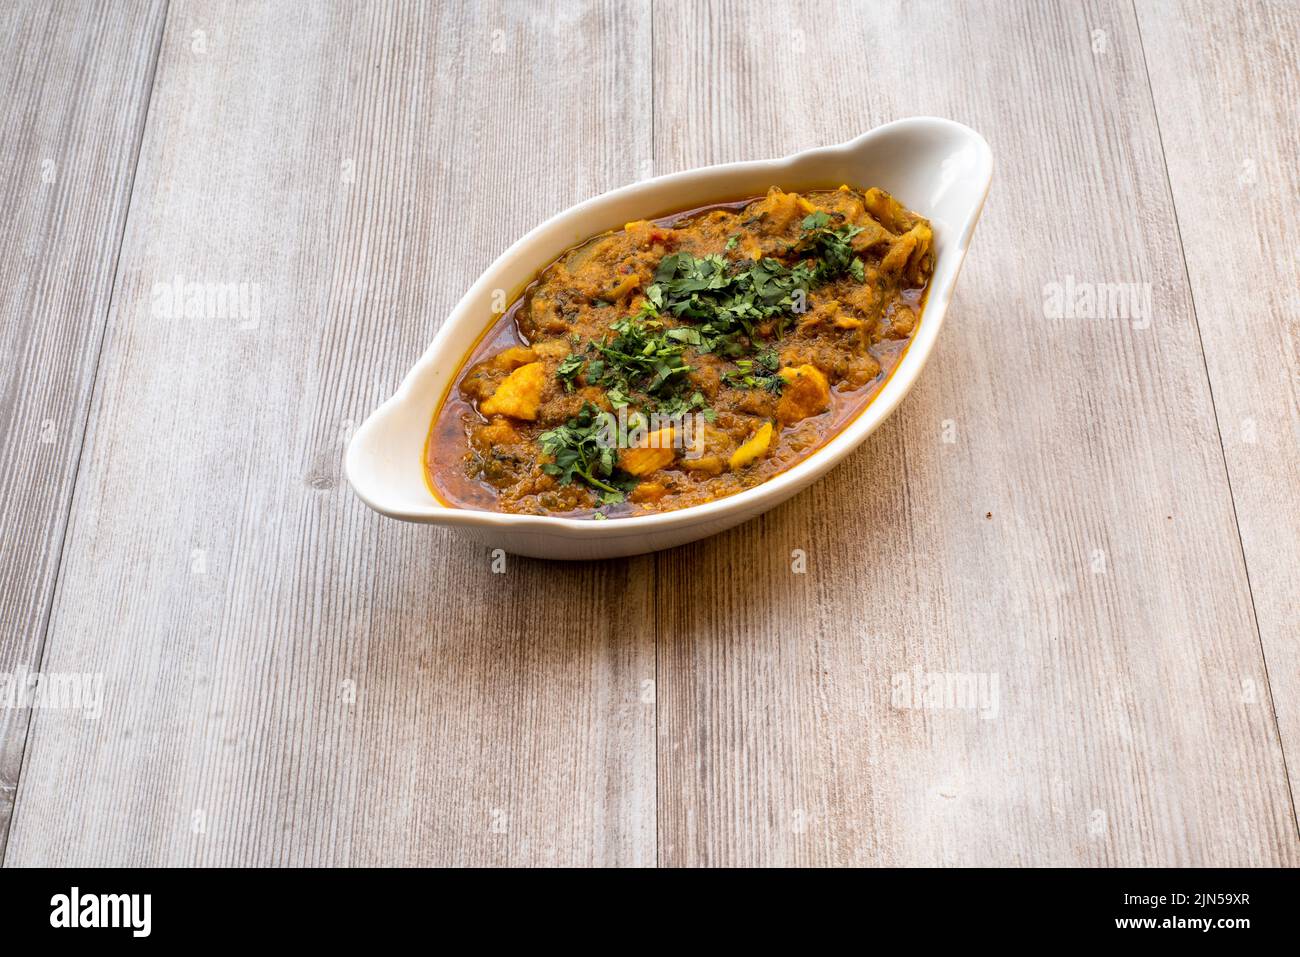 Doncaster, UK - 2019 Mar 21: Chicken Bhuna from Goa Indian Stock Photo